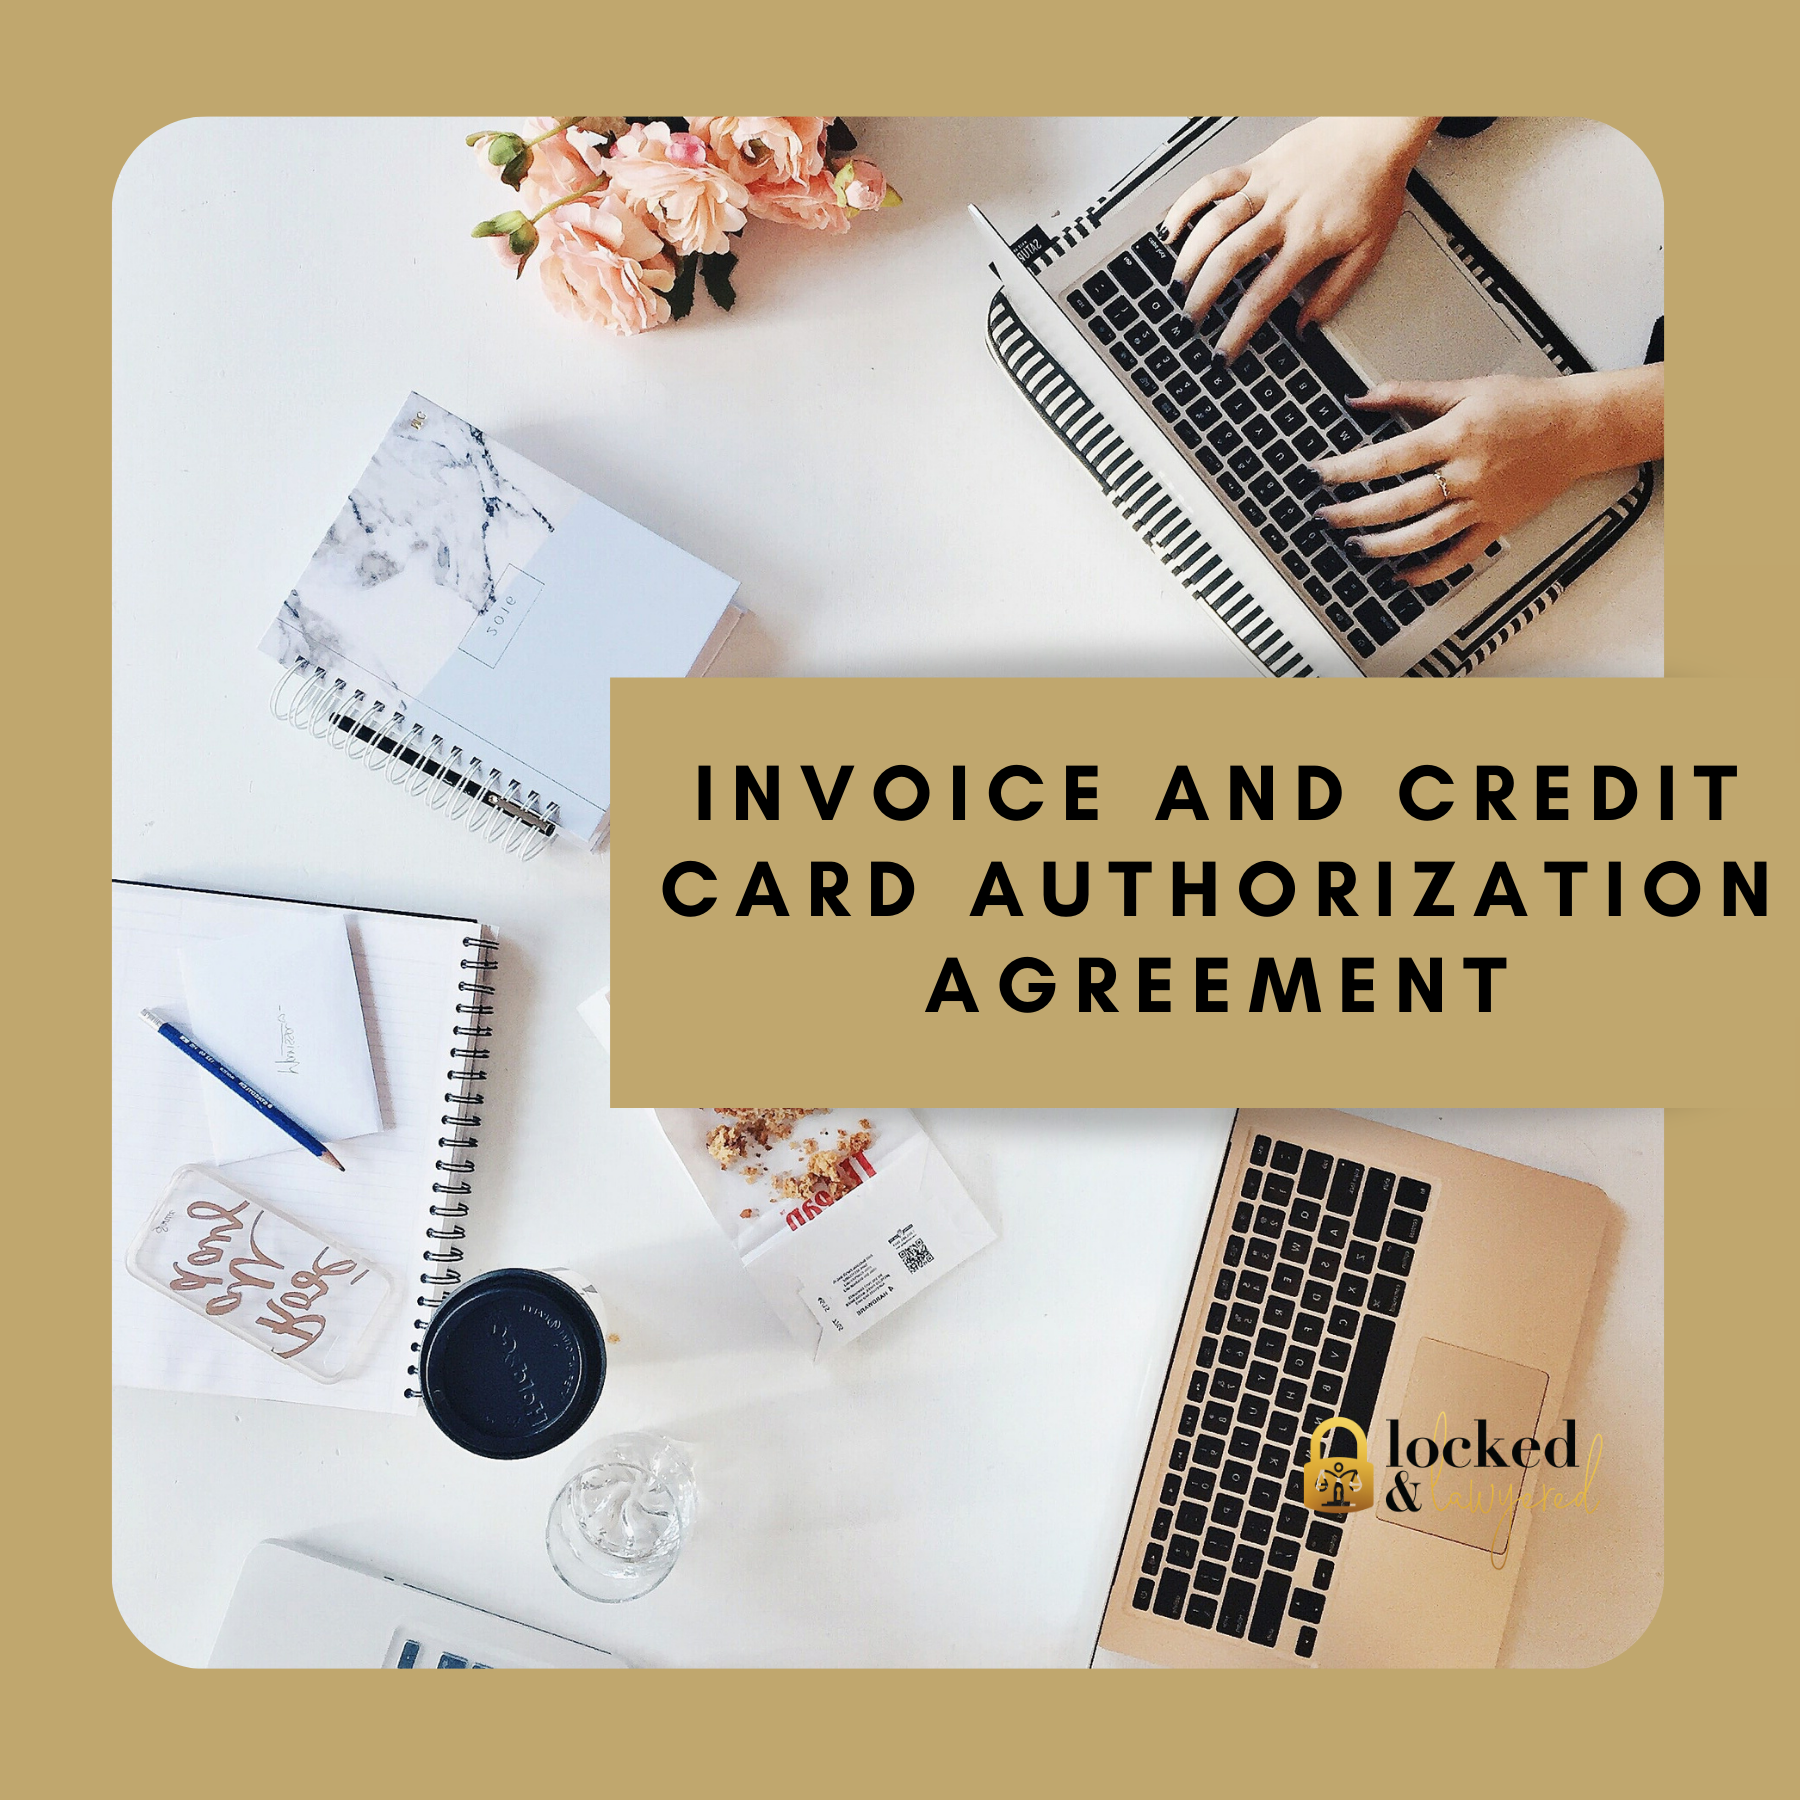 Invoice and Credit Card Authorization Agreement